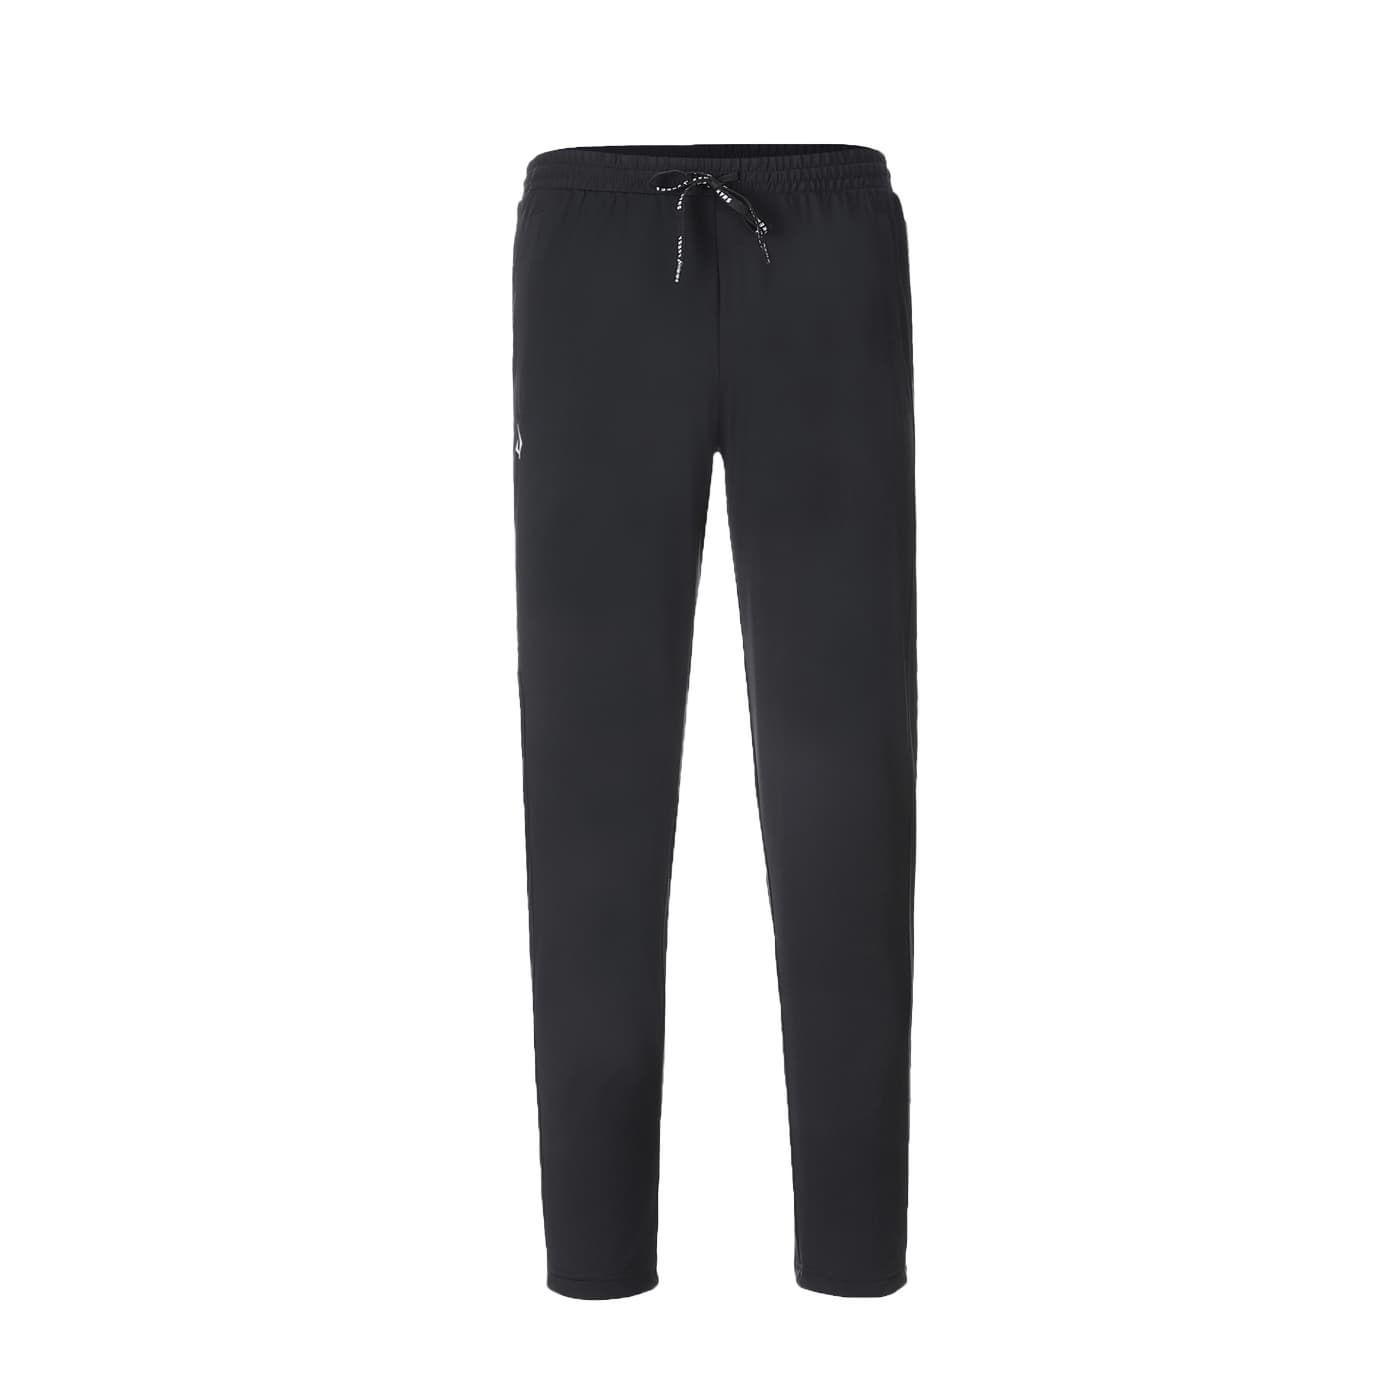 Long pants for sports using the finest woven spandex fabric